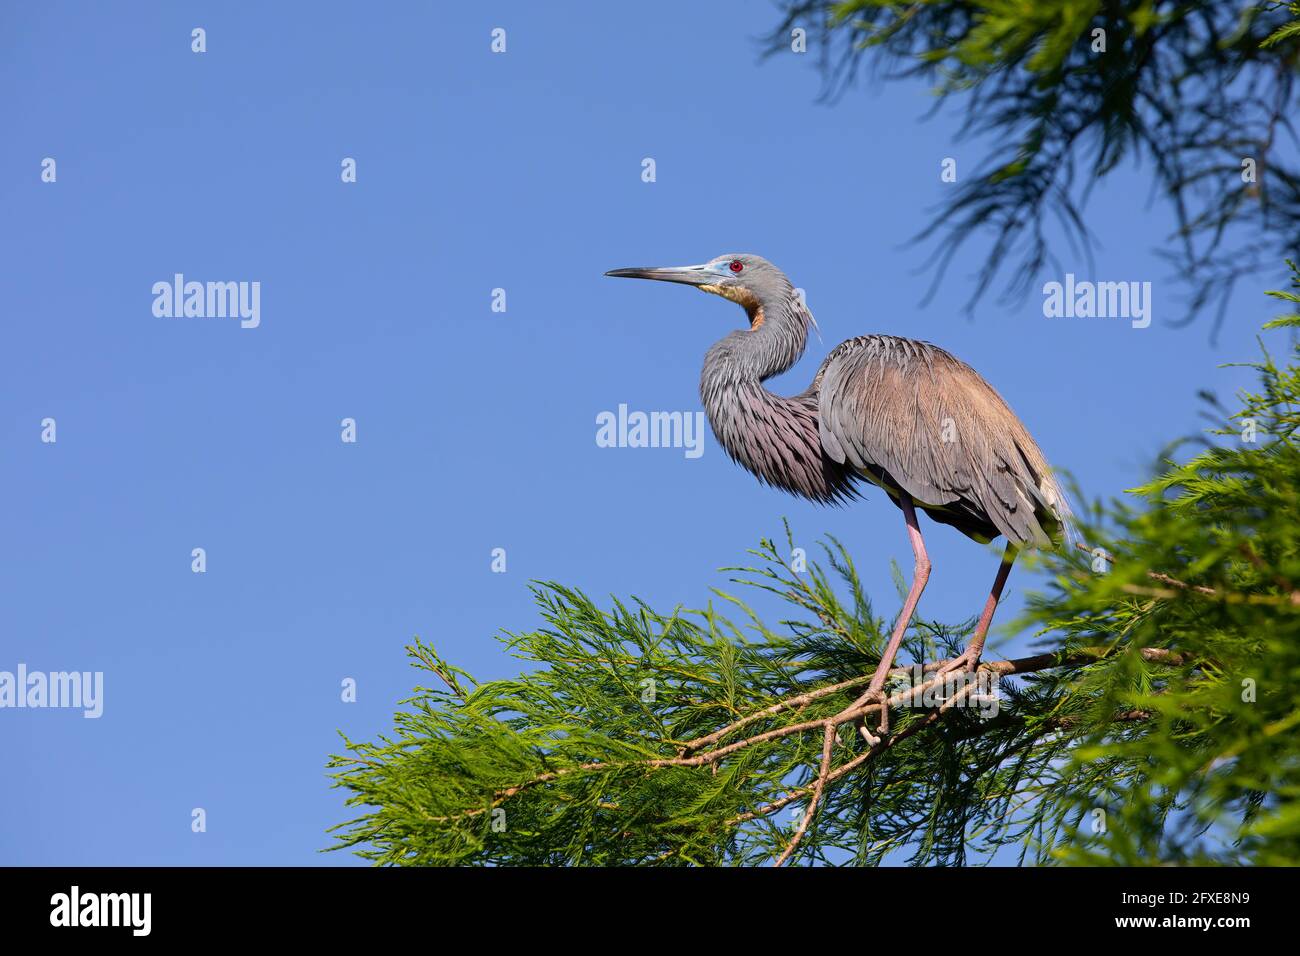 A little blue heron standing on the branch of a tree with a clear blue sky. Stock Photo